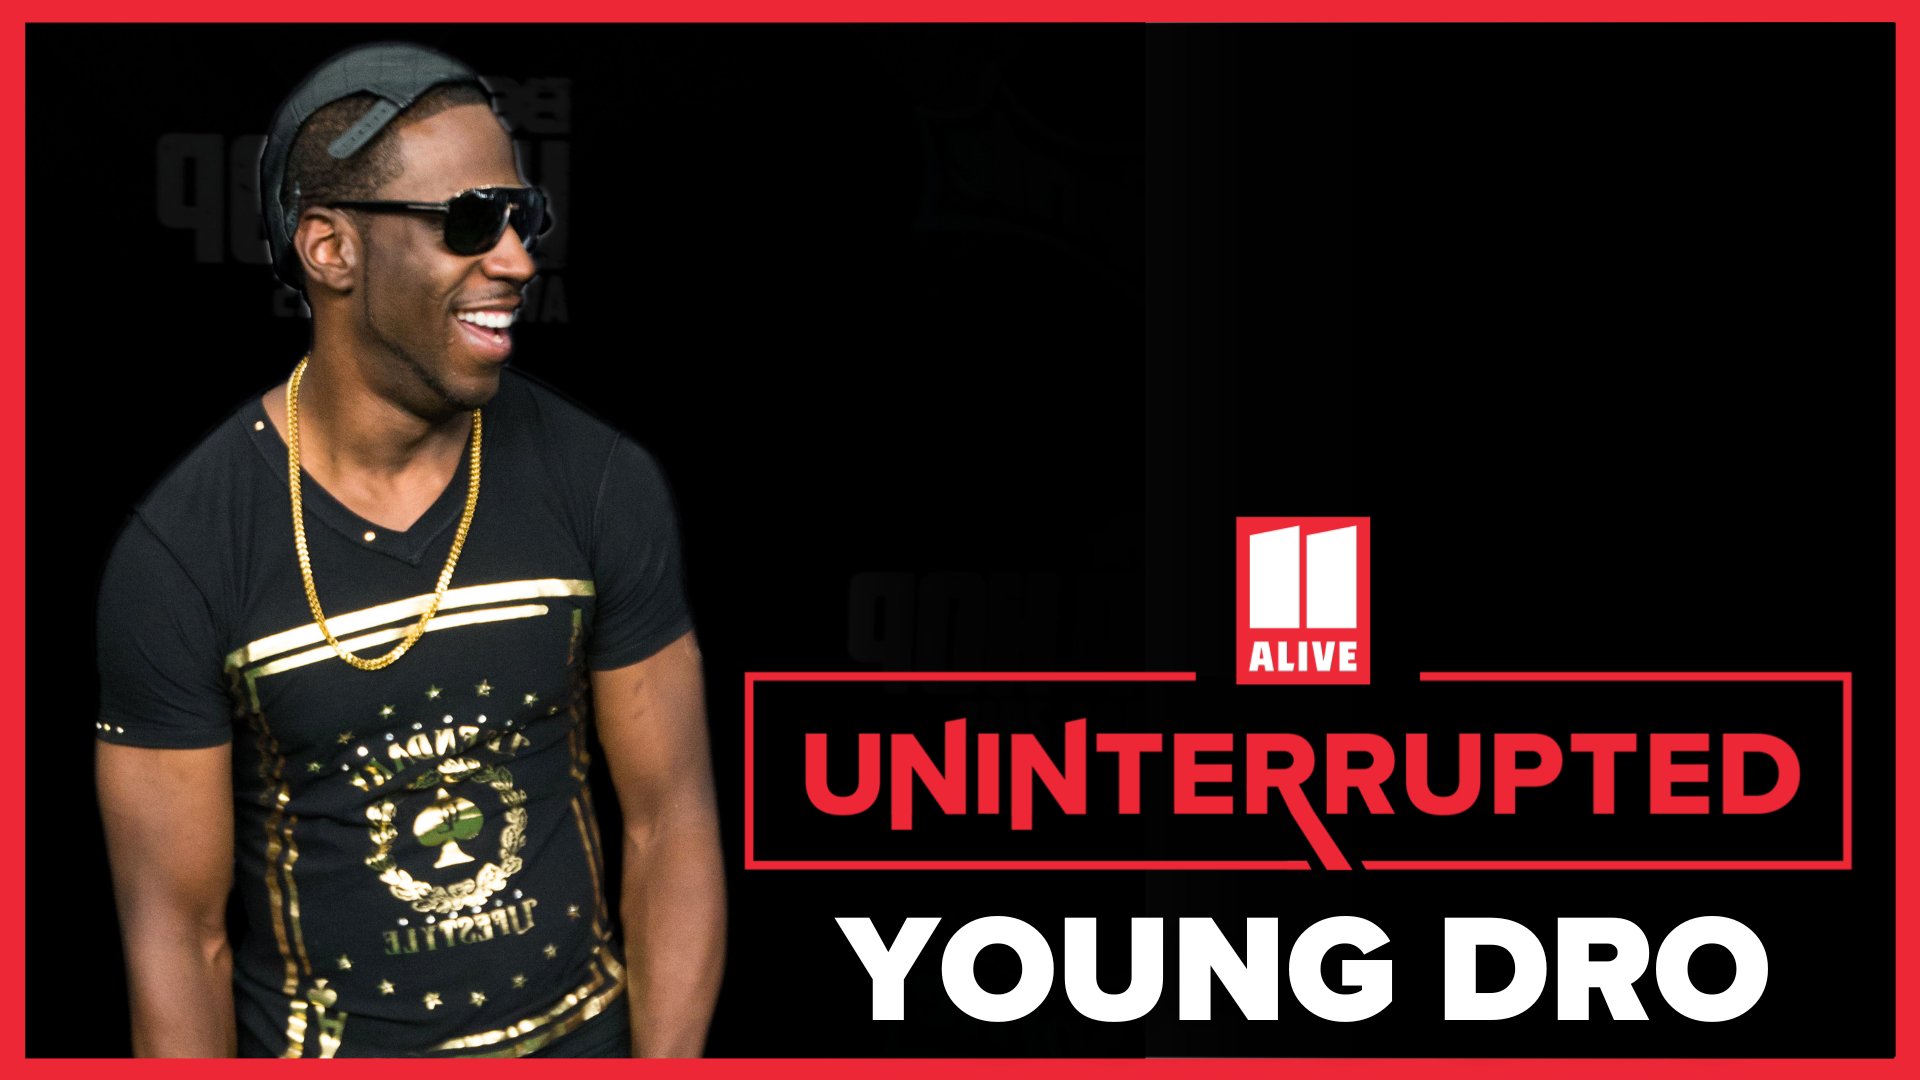 Young Dro, who grew up in Atlanta's westside, discusses why he wants to bring the initiative to the city's youth.